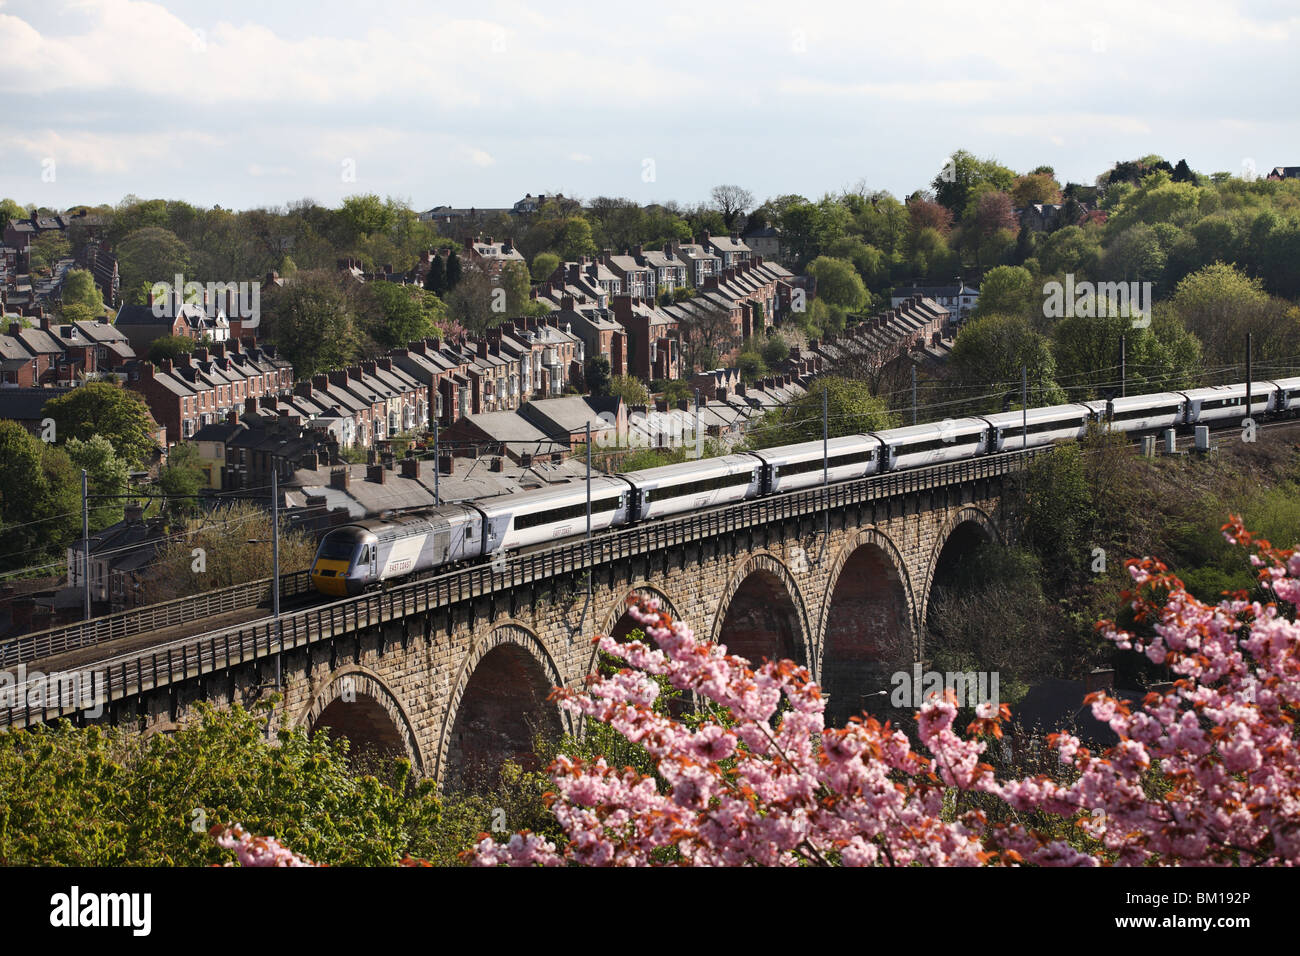 A high speed diesel train of the East Coast company seen crossing the viaduct at Durham, England, UK Stock Photo